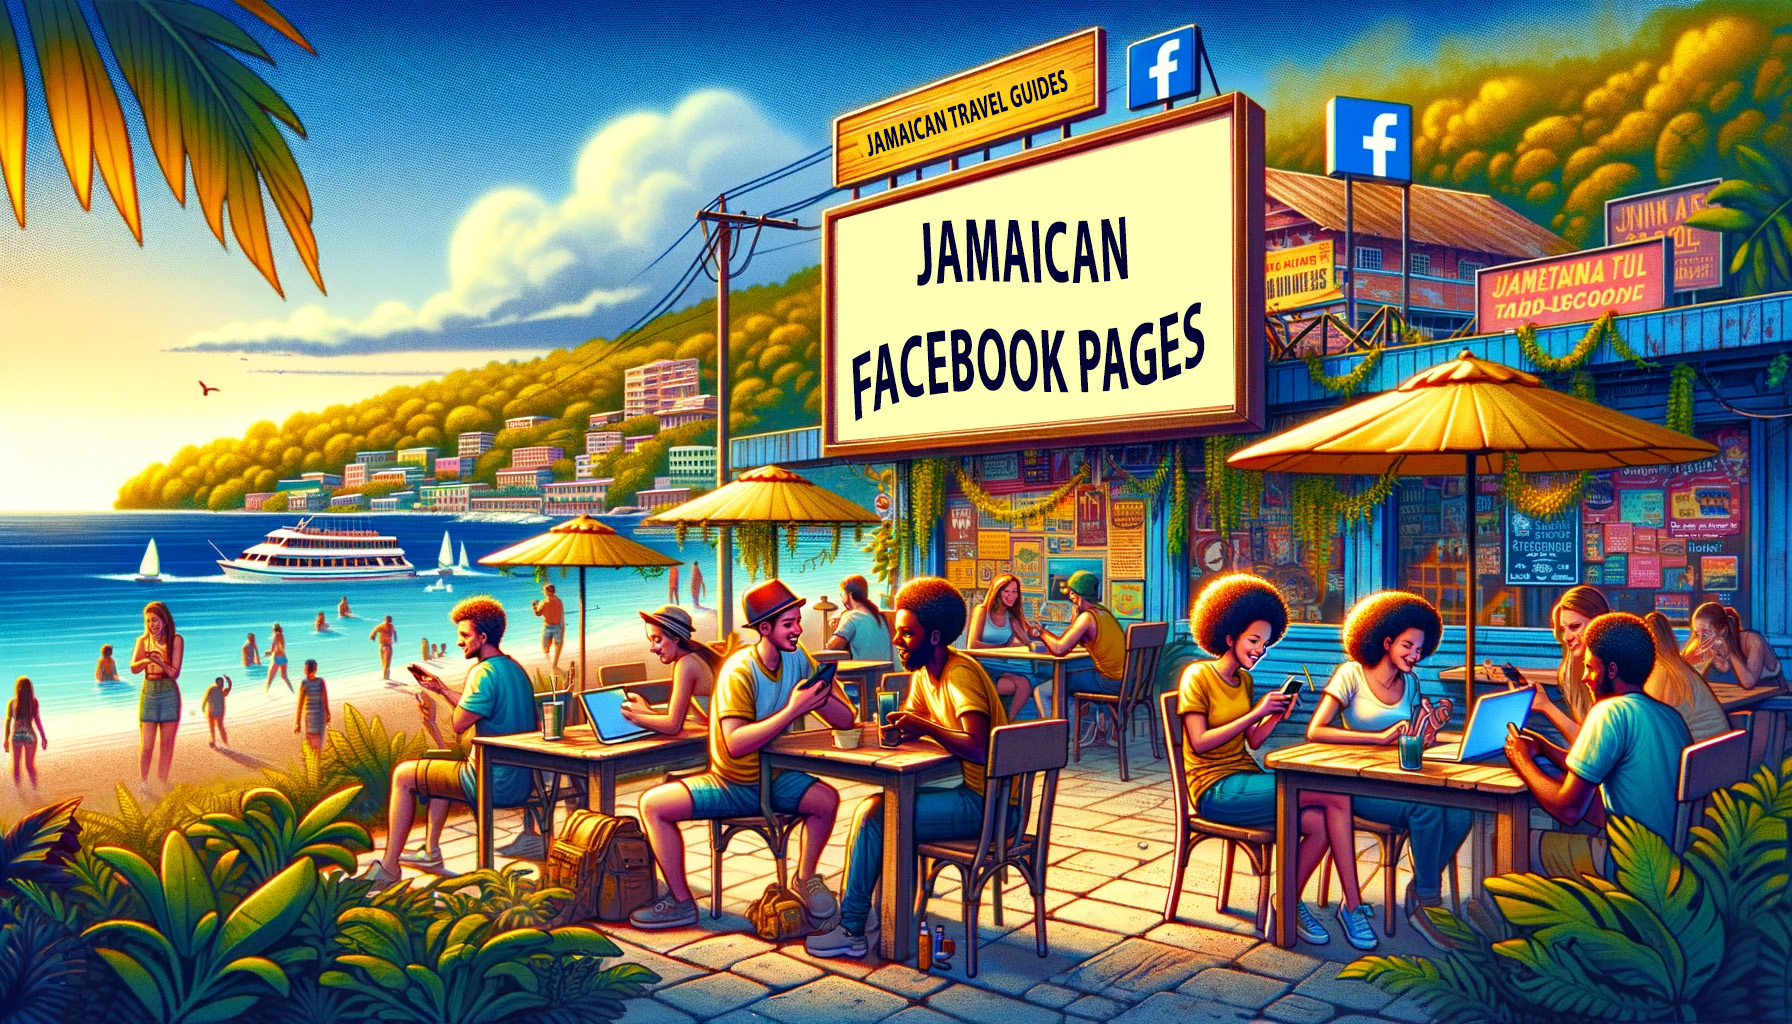 Jamaican Facebook Pages - Jamaican Travel Guides